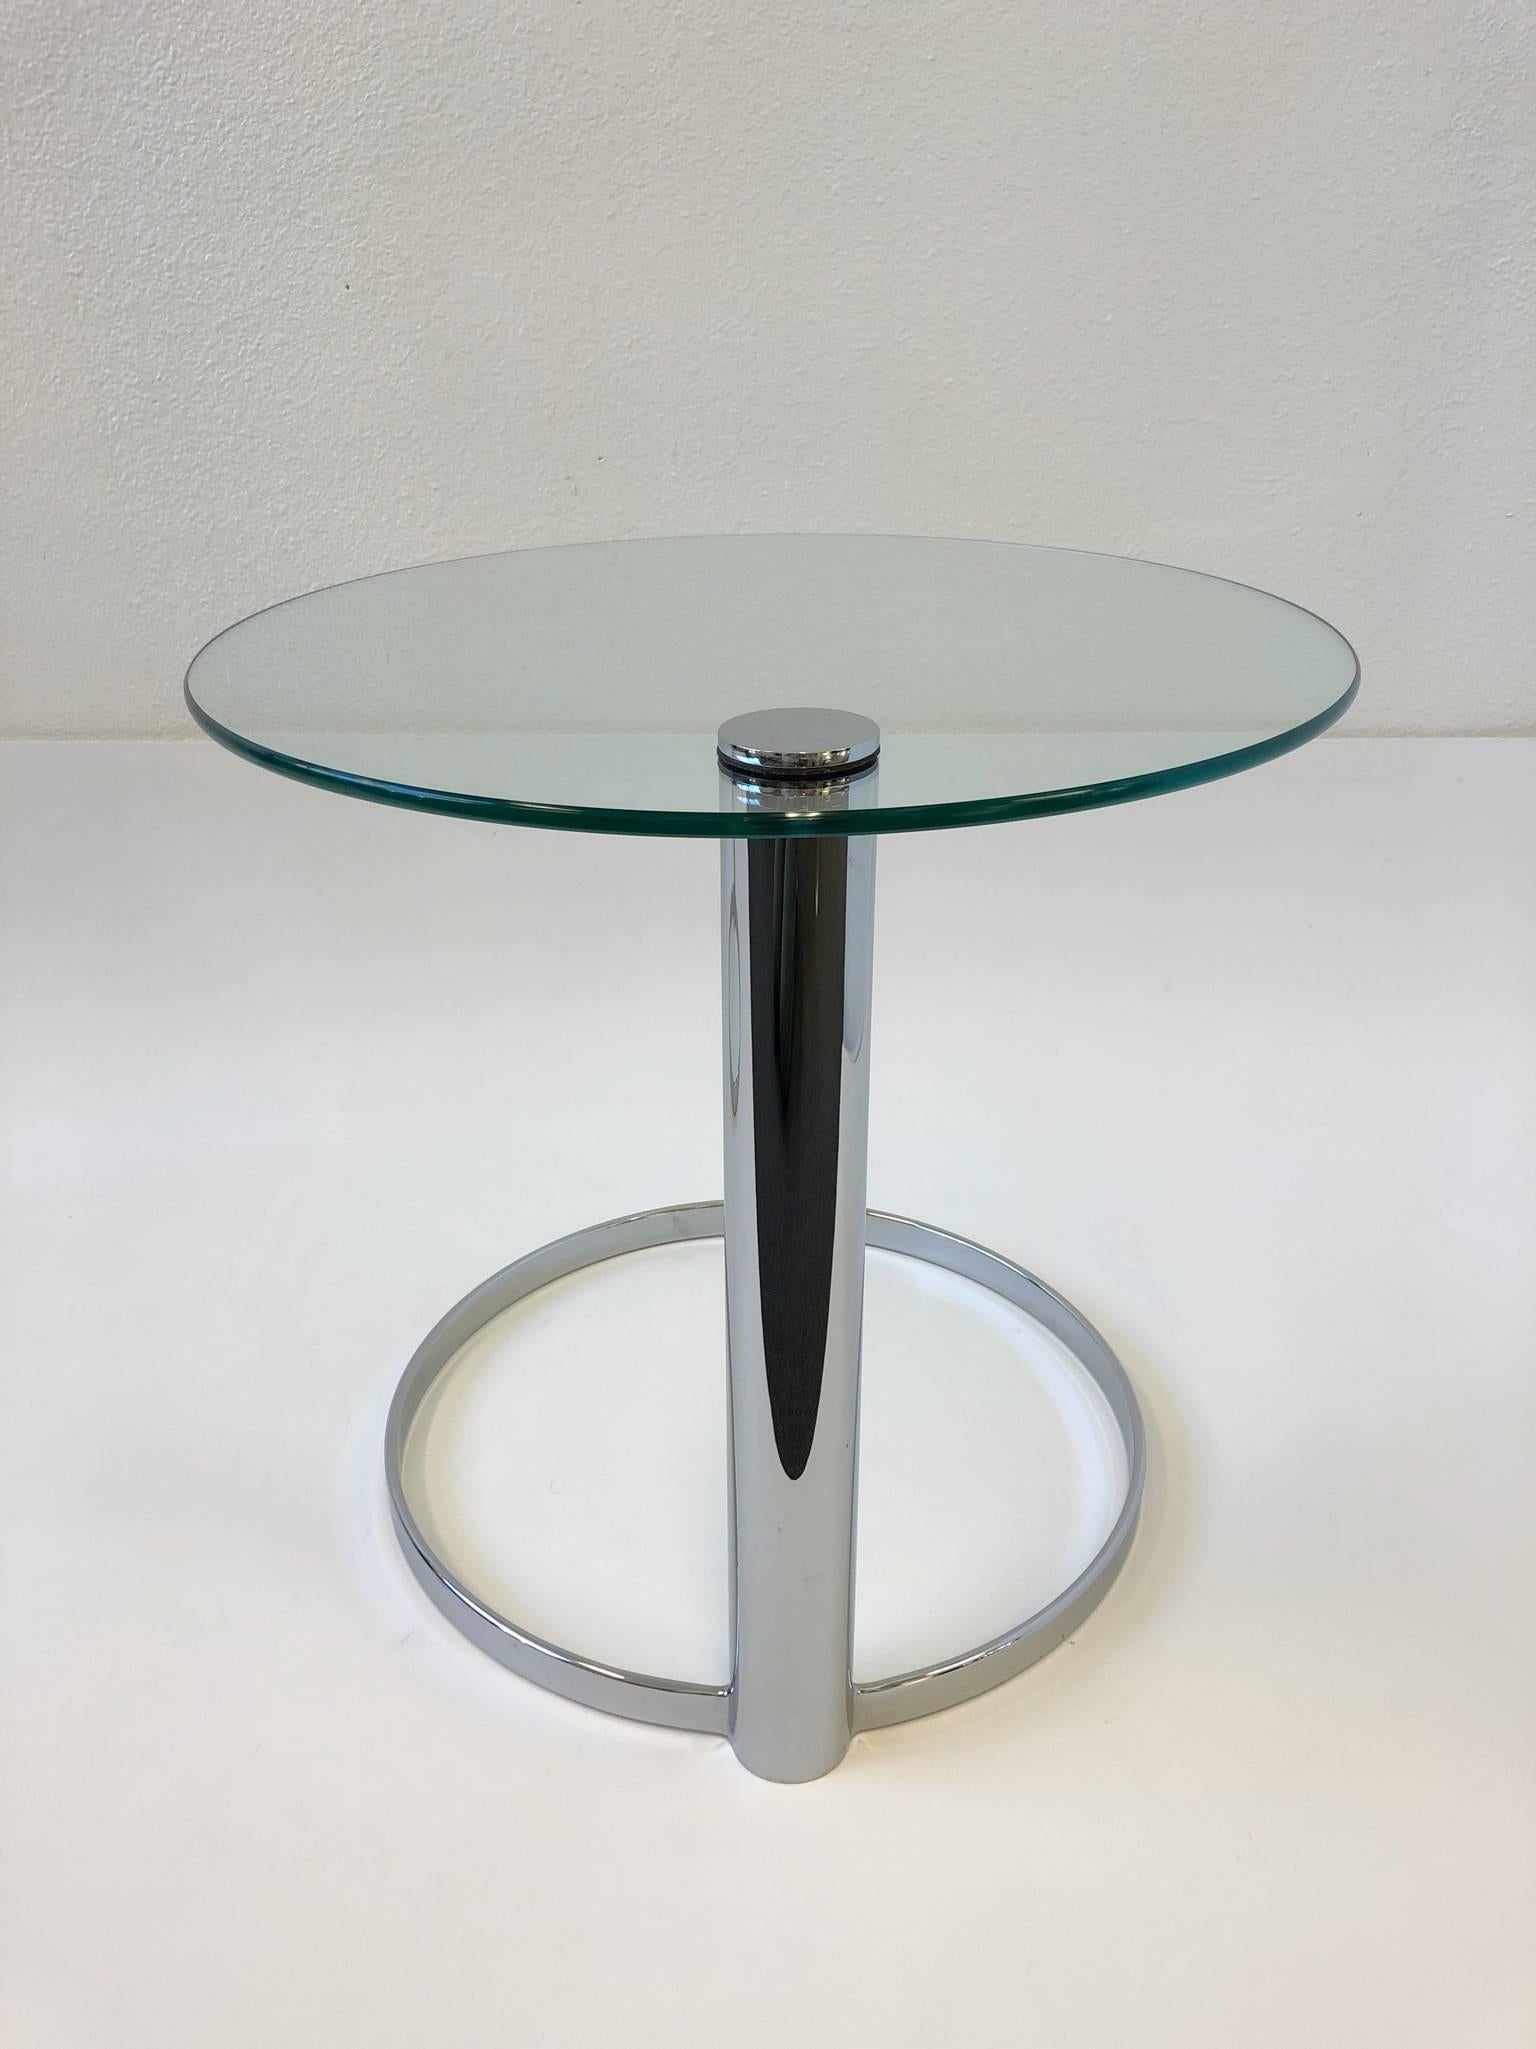 Pair of Chrome and Glass Side Tables by John Mascheroni for Swaim 1